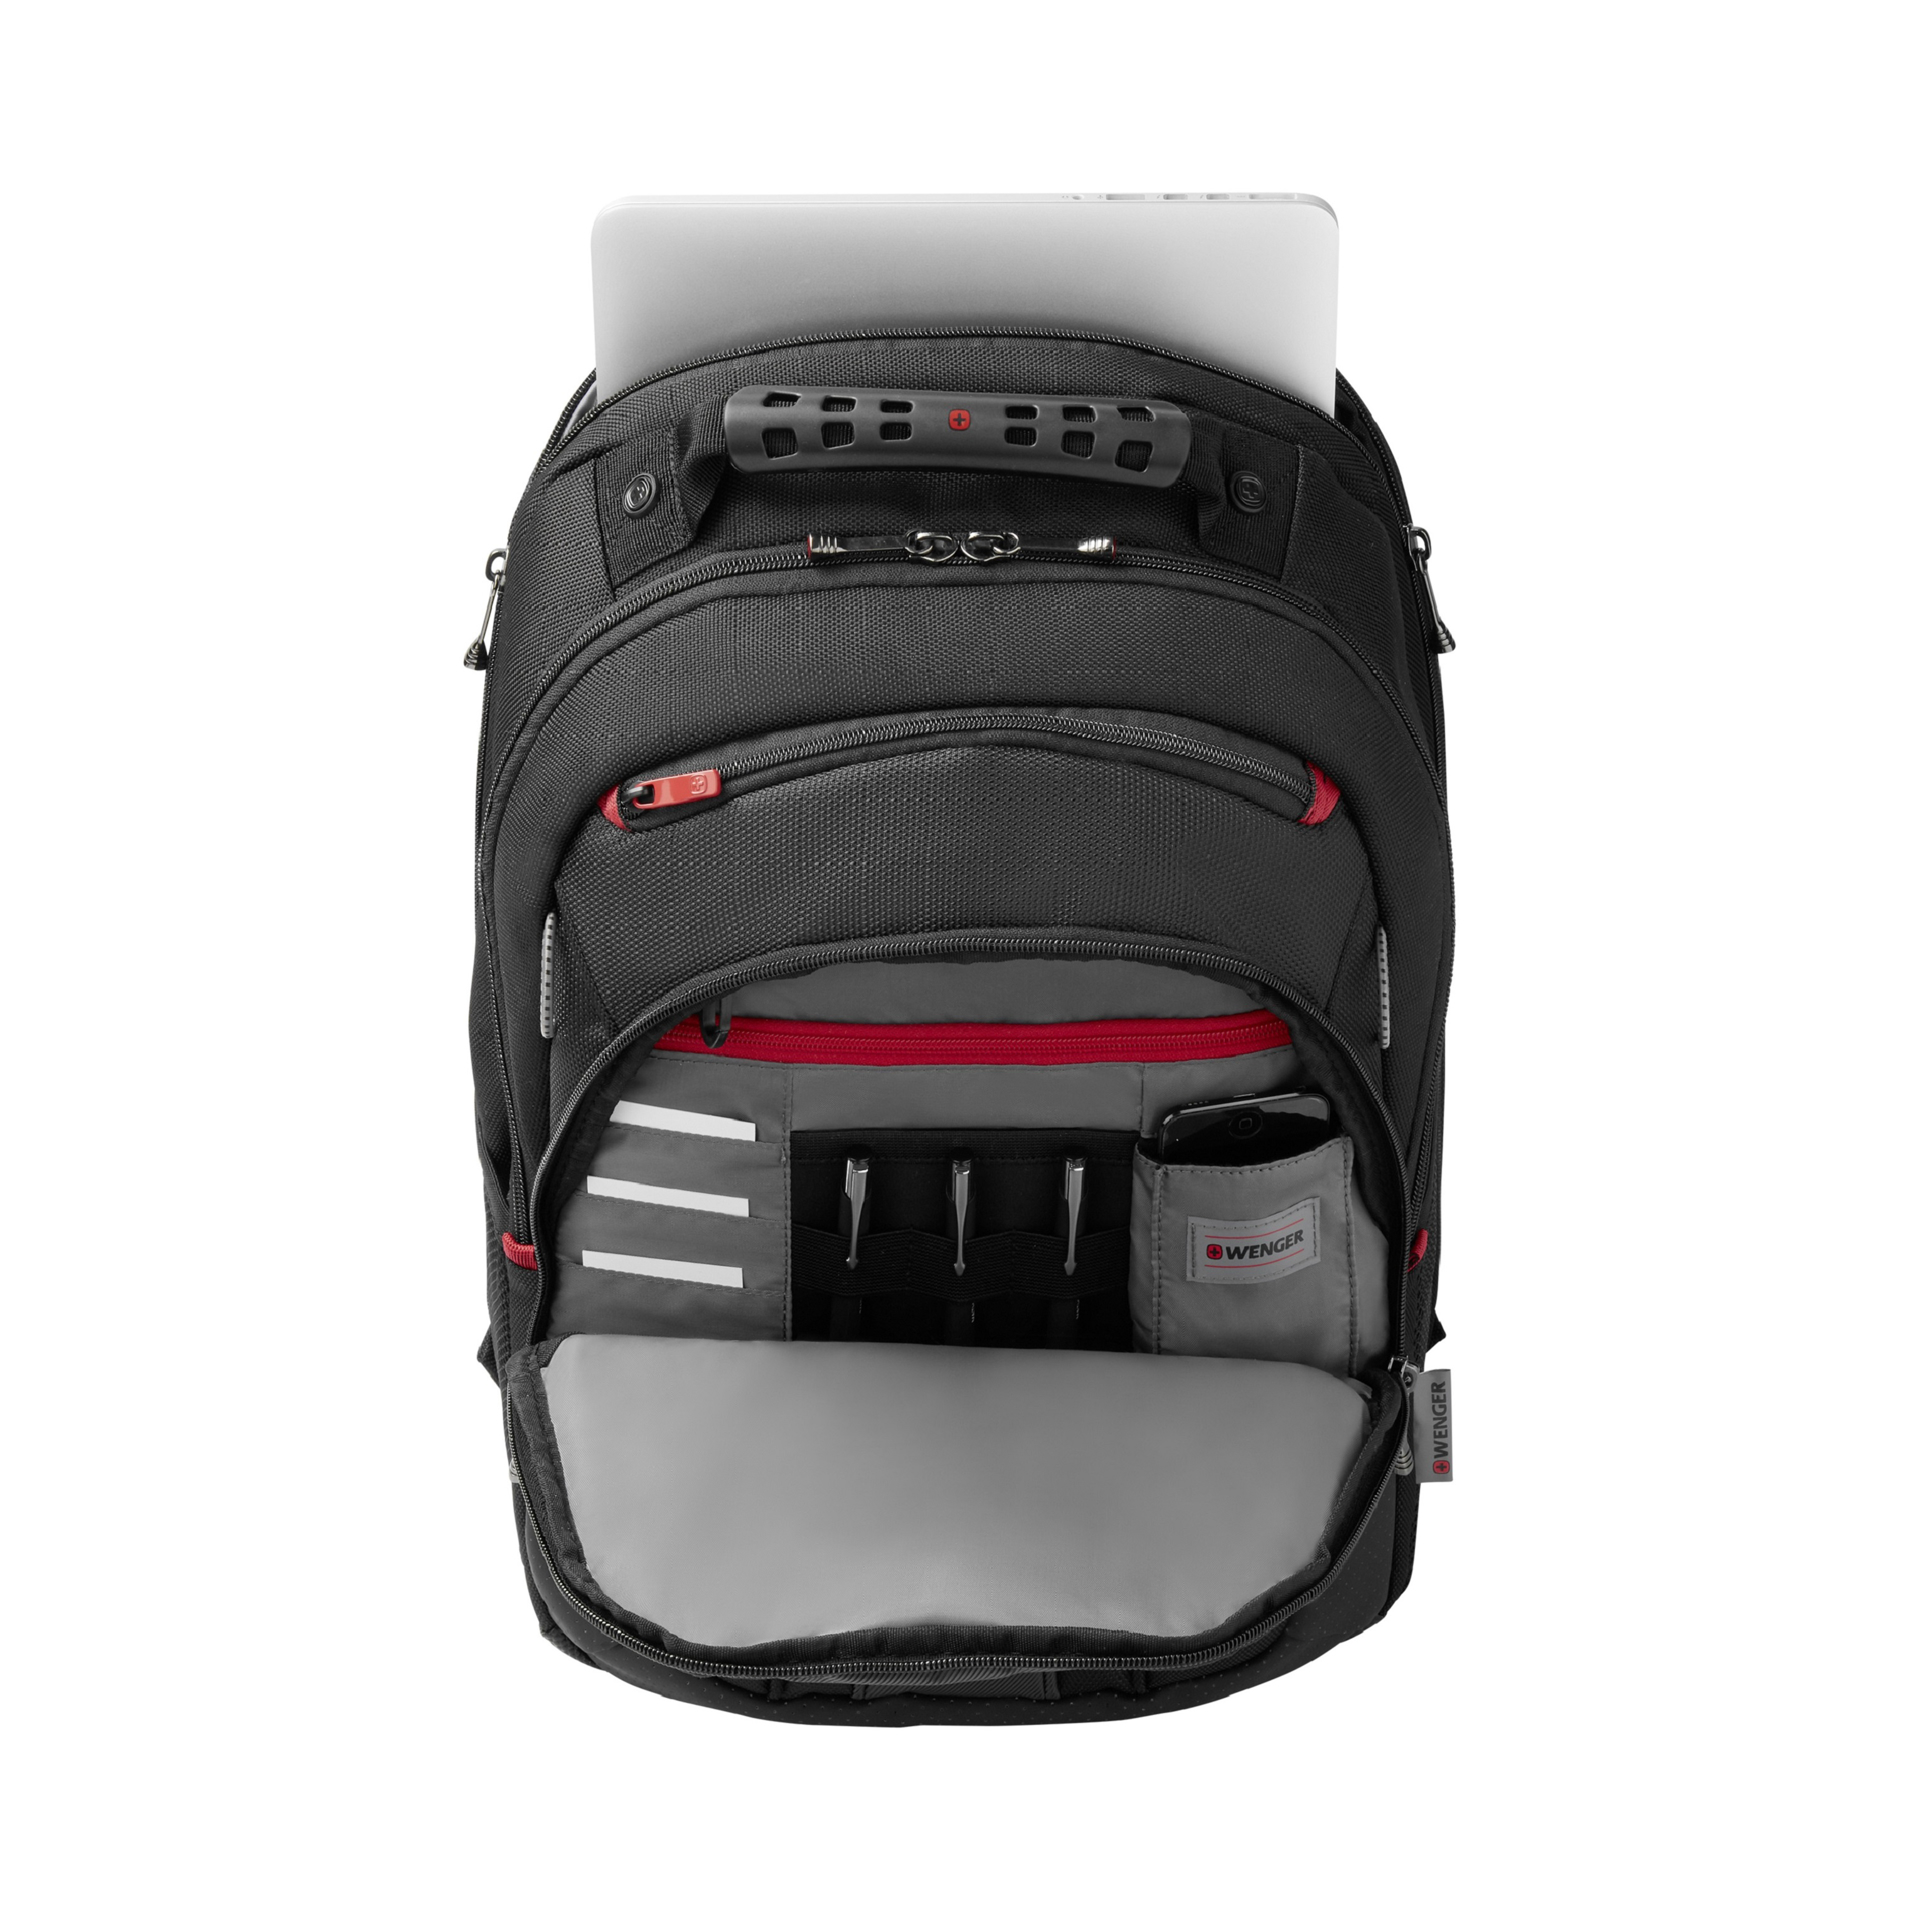 Wenger Legacy Backpack showing inner compartments